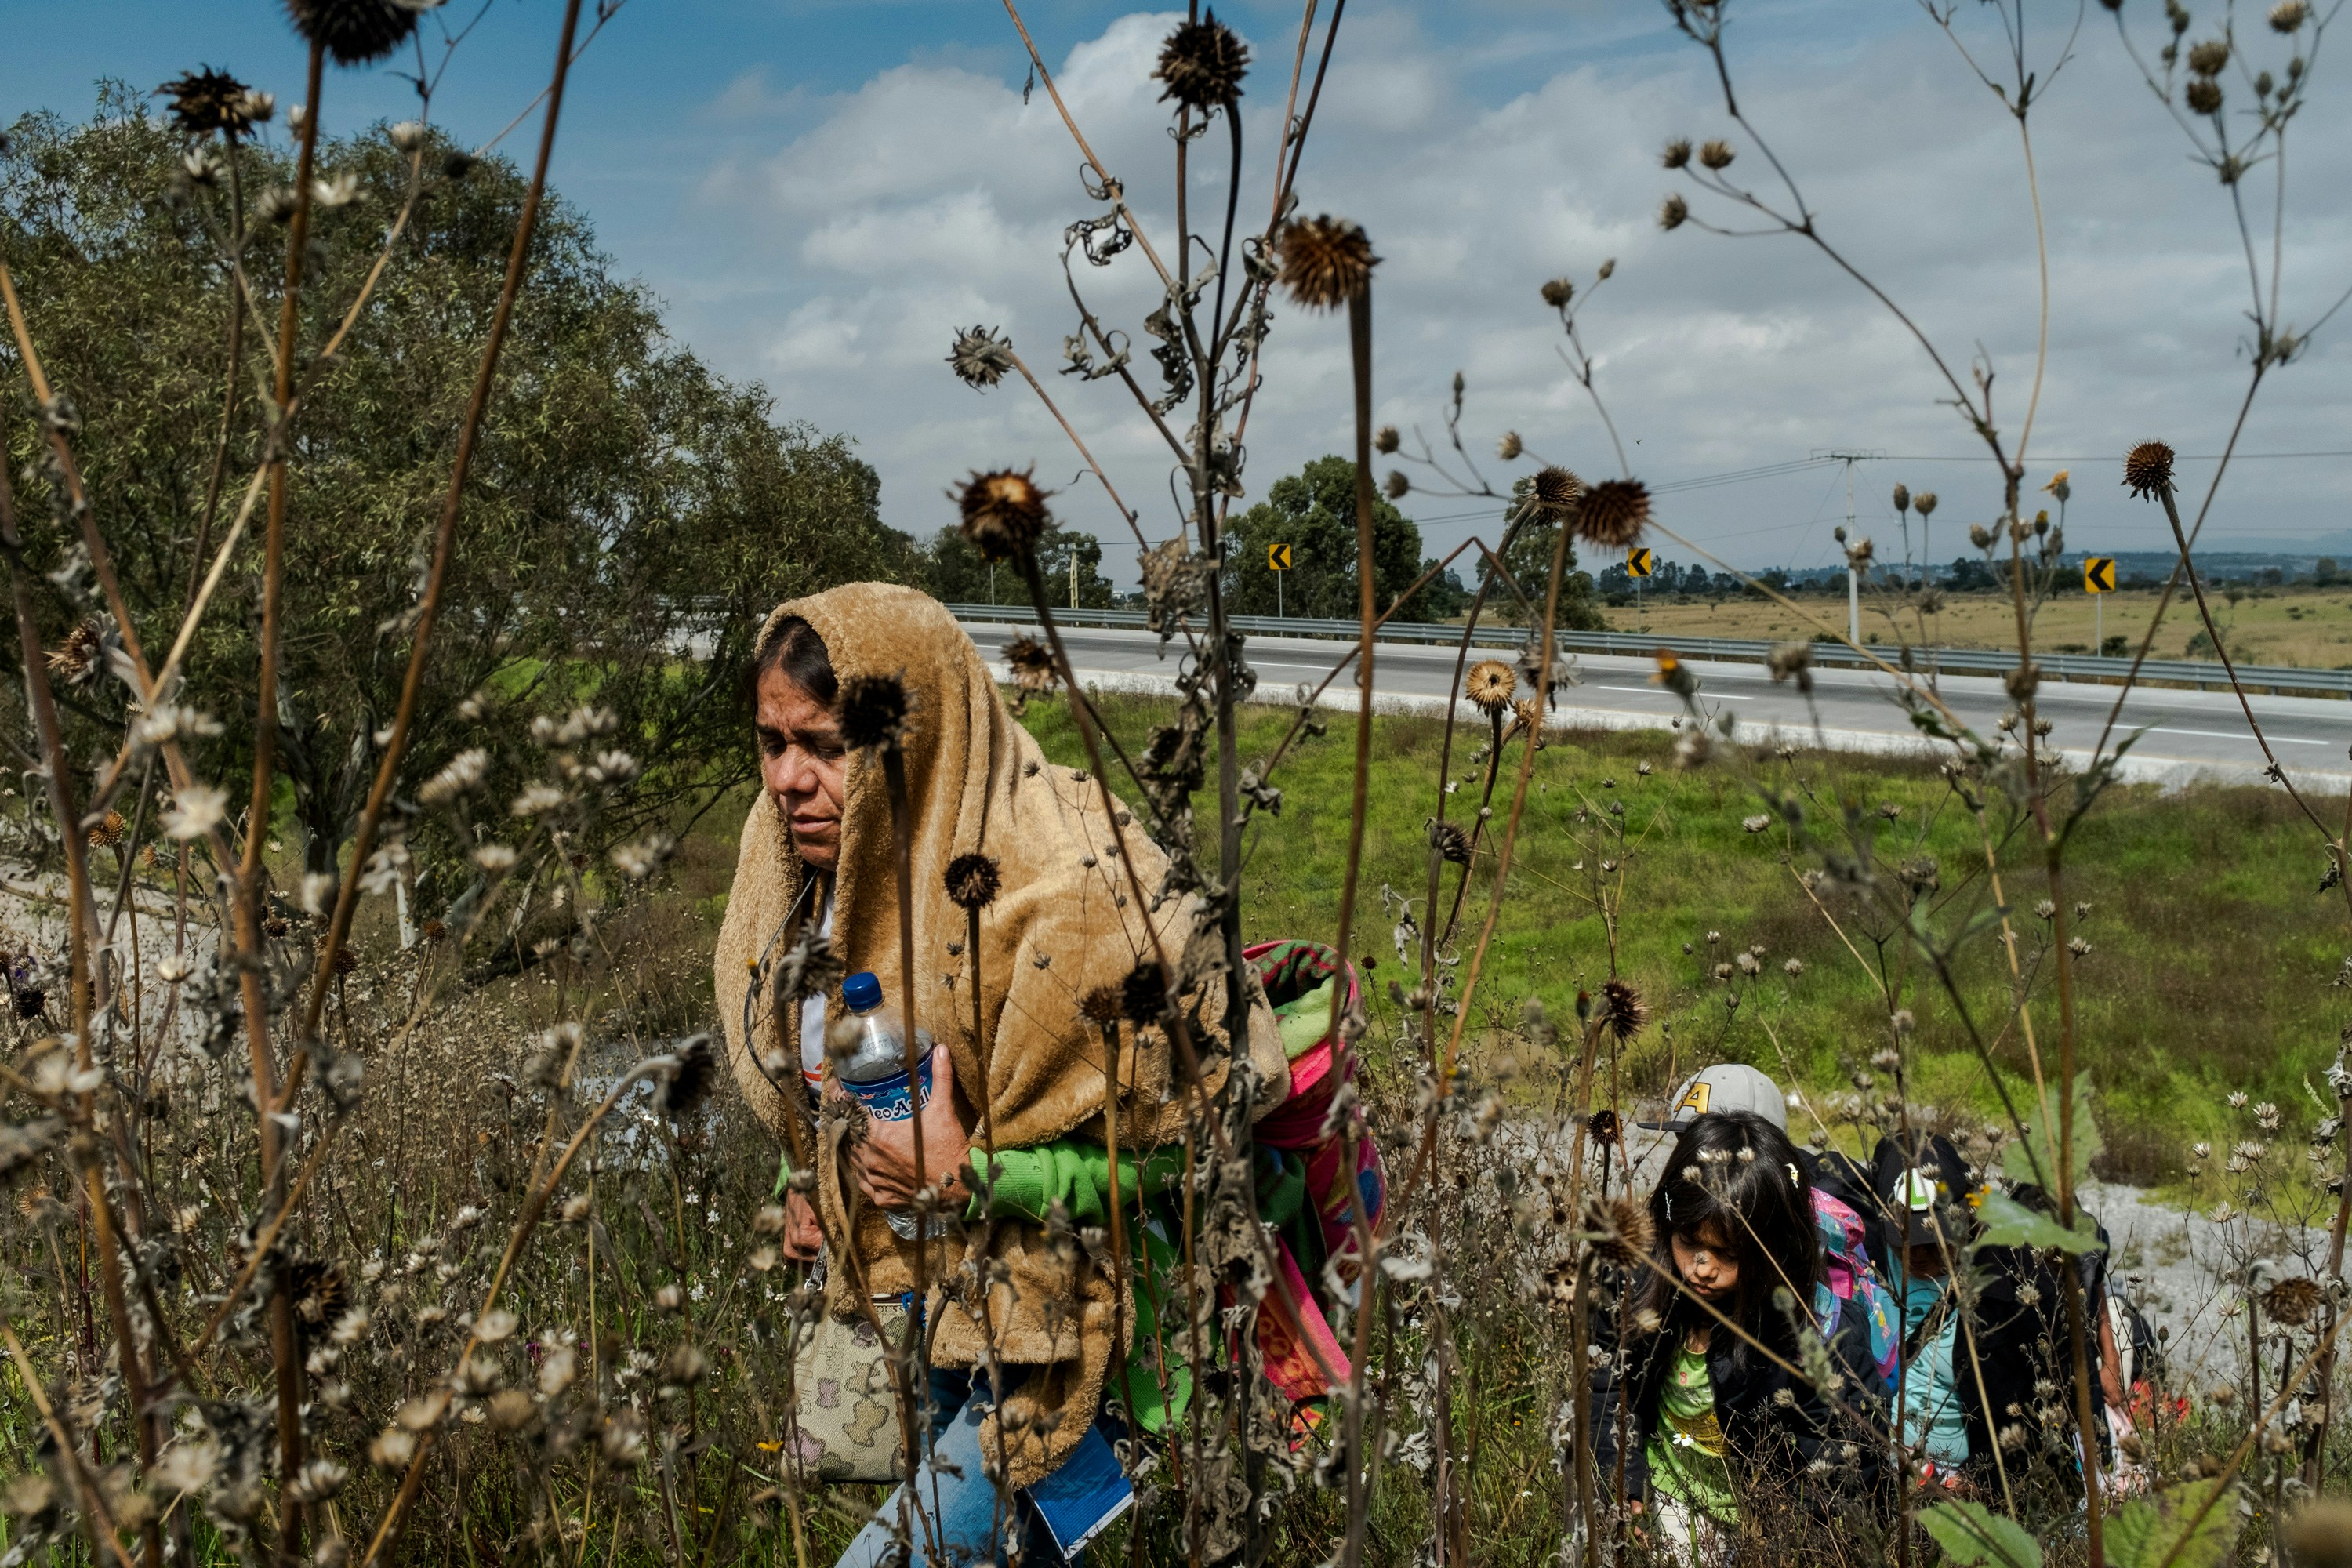 A Central American migrant woman walks up a hill near a truck rest stop after jumping off a cargo truck carrying migrants from the Central American caravan on its way to the city of Santiago de Querétaro on November 10, 2018. Earlier that morning thousands of migrants from the first caravan exited Mexico City where for over a week they rested and waited to continue their journey northbound to Tijuana.Photographer: Mark Abramson